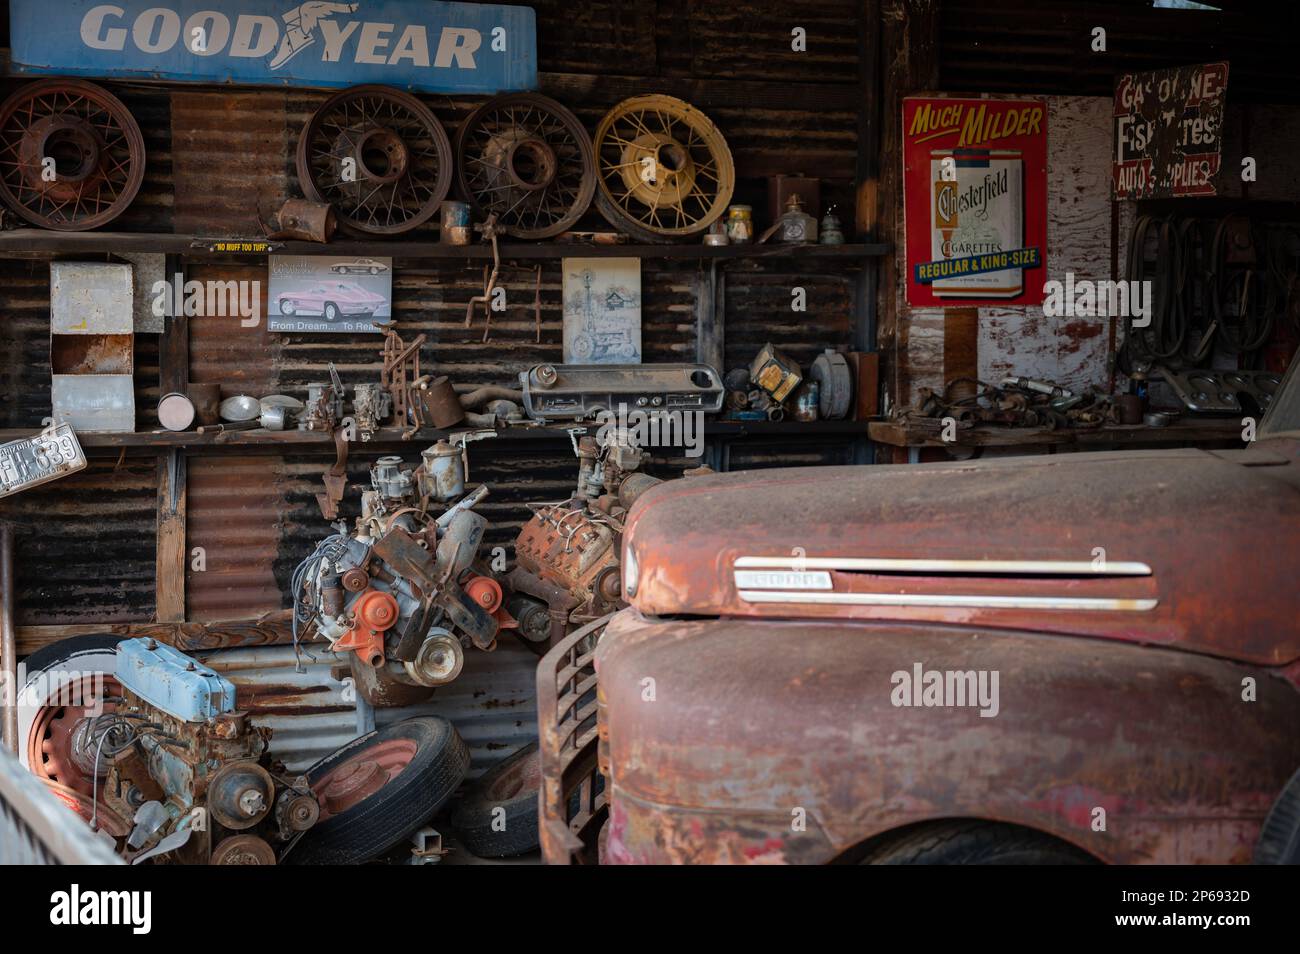 Old abandoned car mechanic shop on the desert road. Inside is an old Ford F-1 pickup. Stock Photo